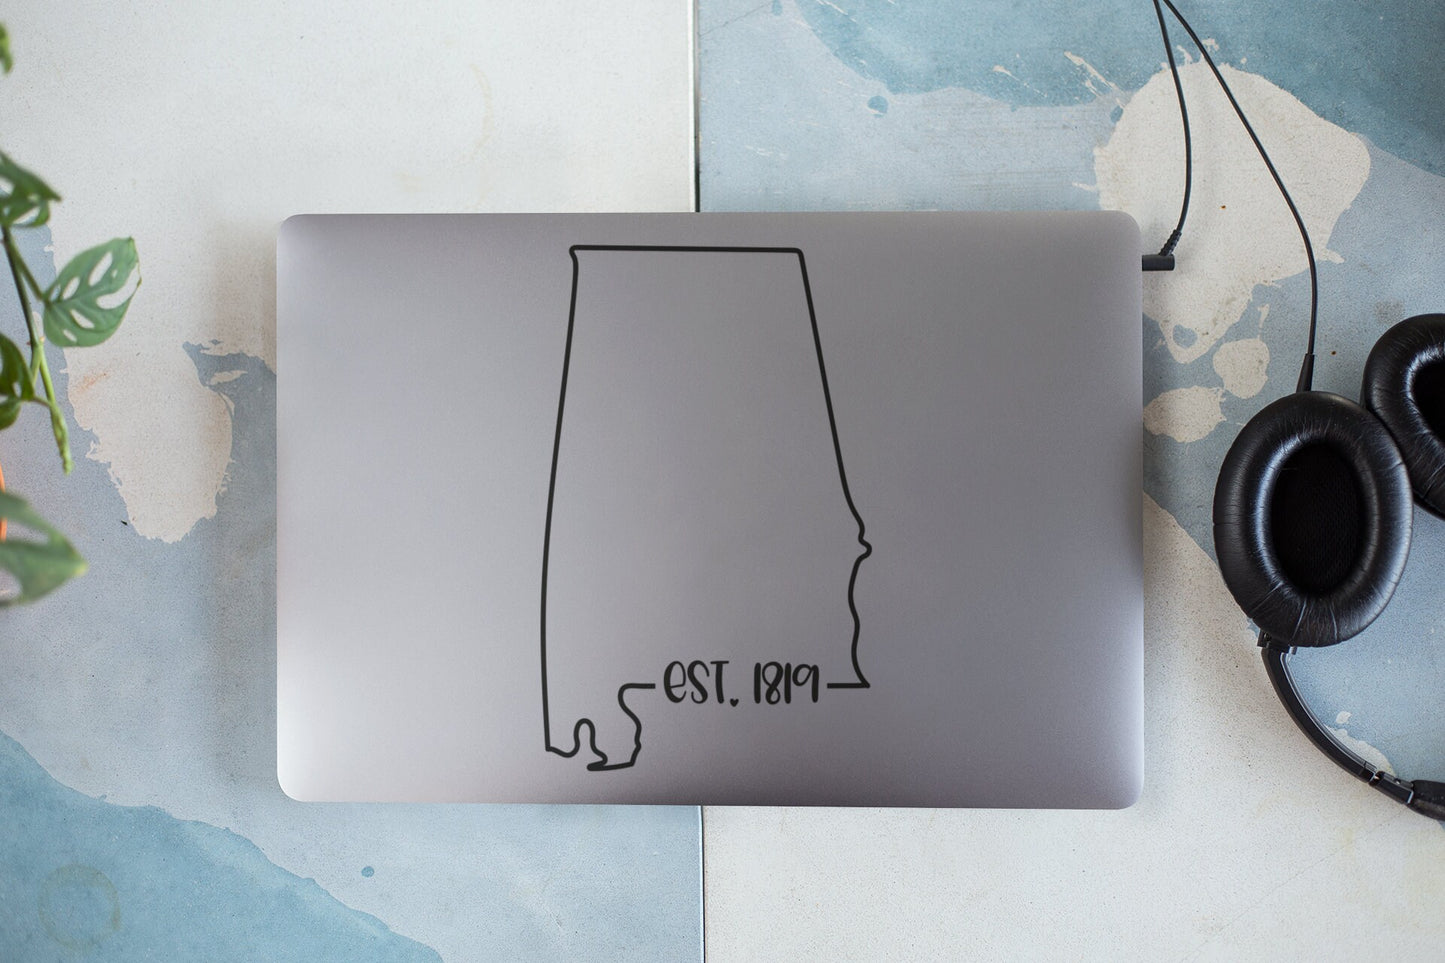 Alabama EST. 1819 Decal - Many Colors & Sizes